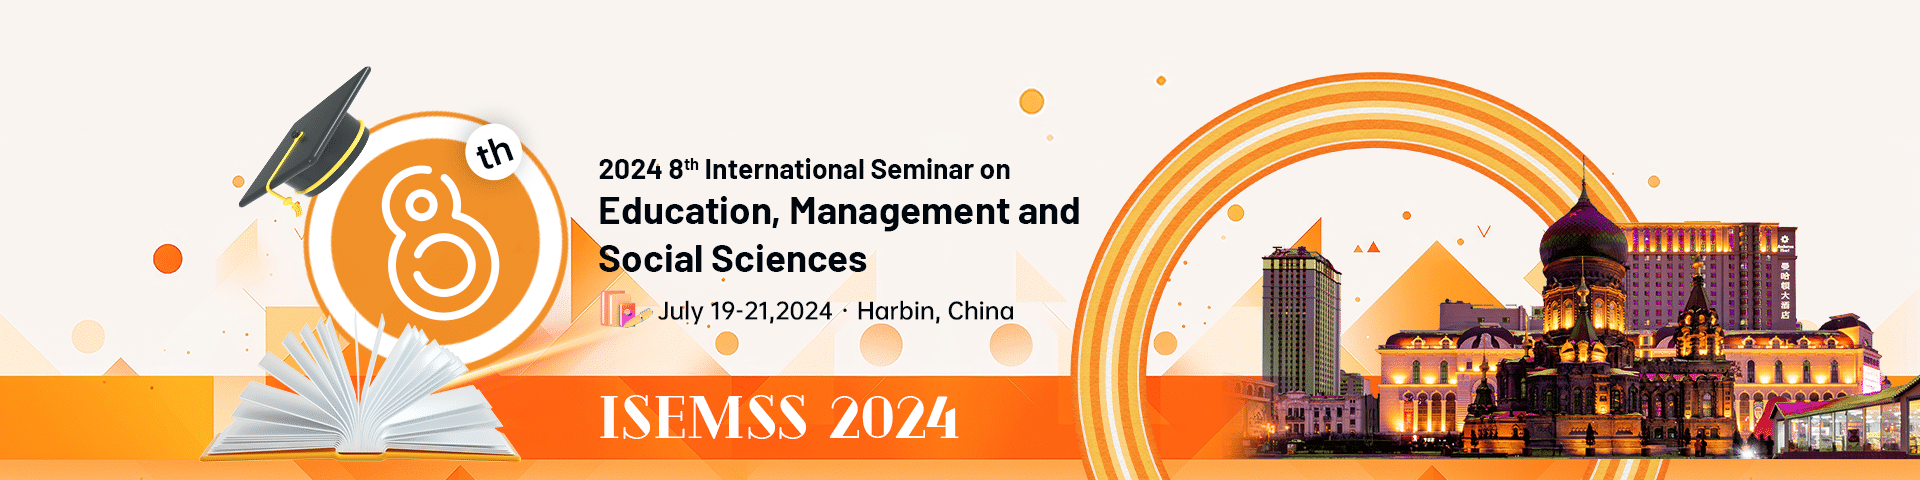 2024 8th International Seminar on Education, Management and Social Sciences (ISEMSS 2024)